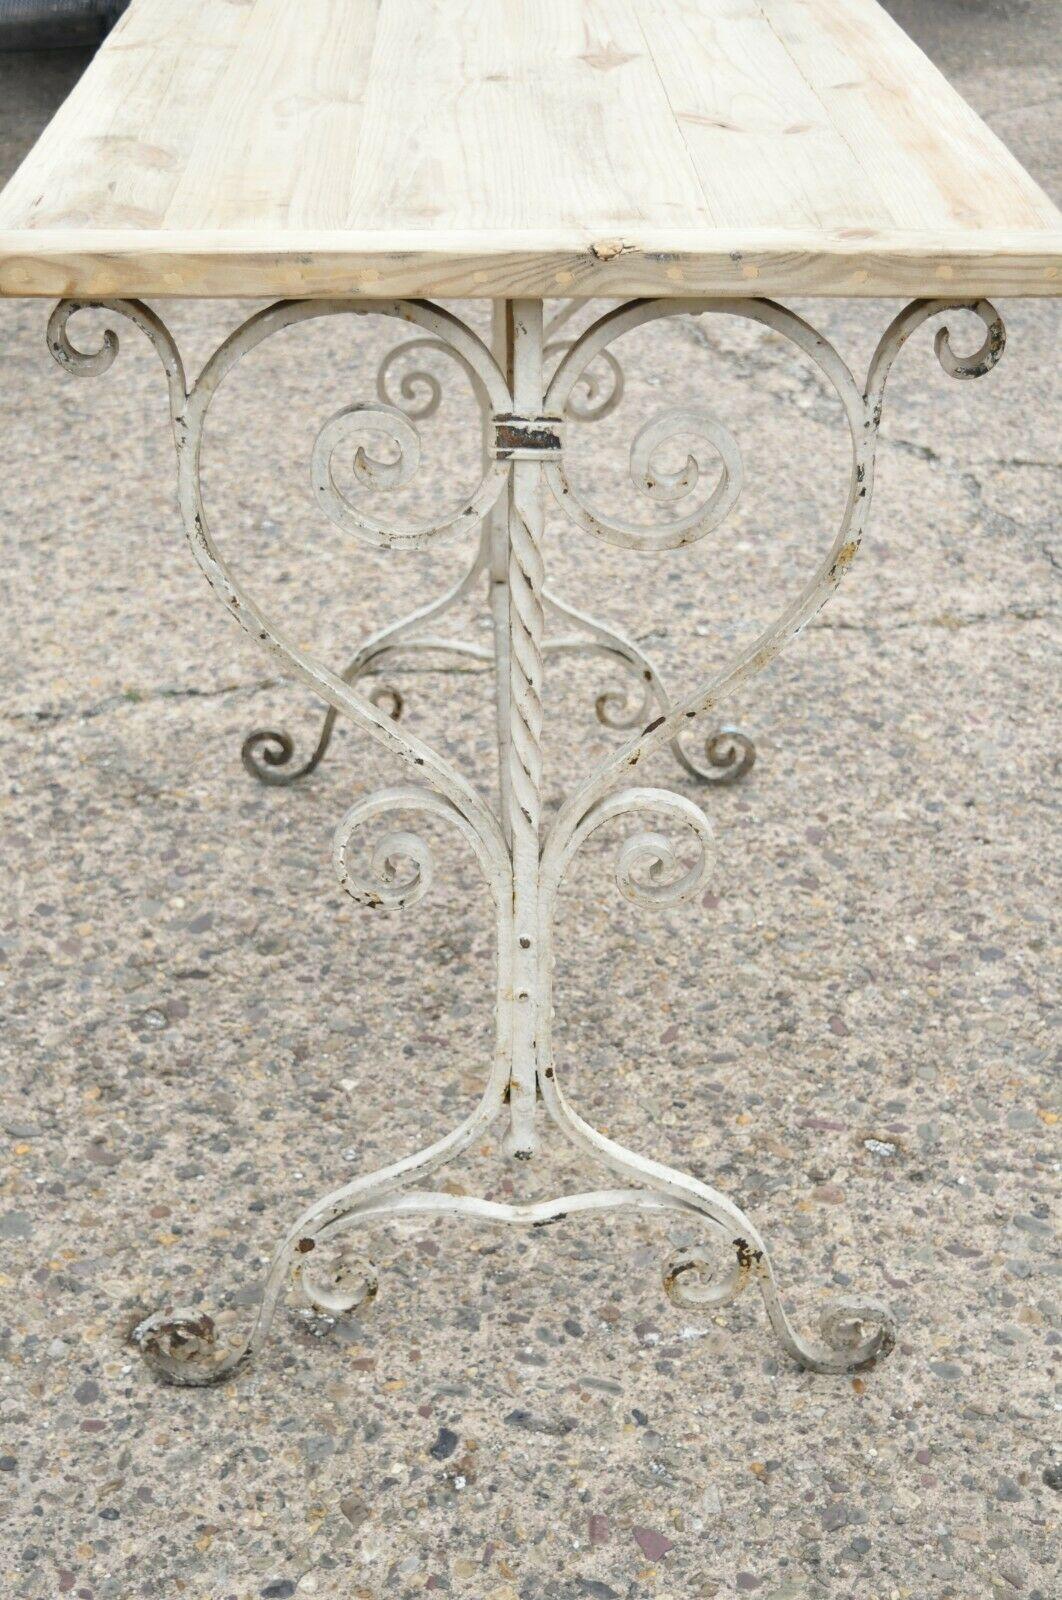 Antique French Art Nouveau Scroll Wrought Iron Wood Top Drafting Work Table For Sale 1